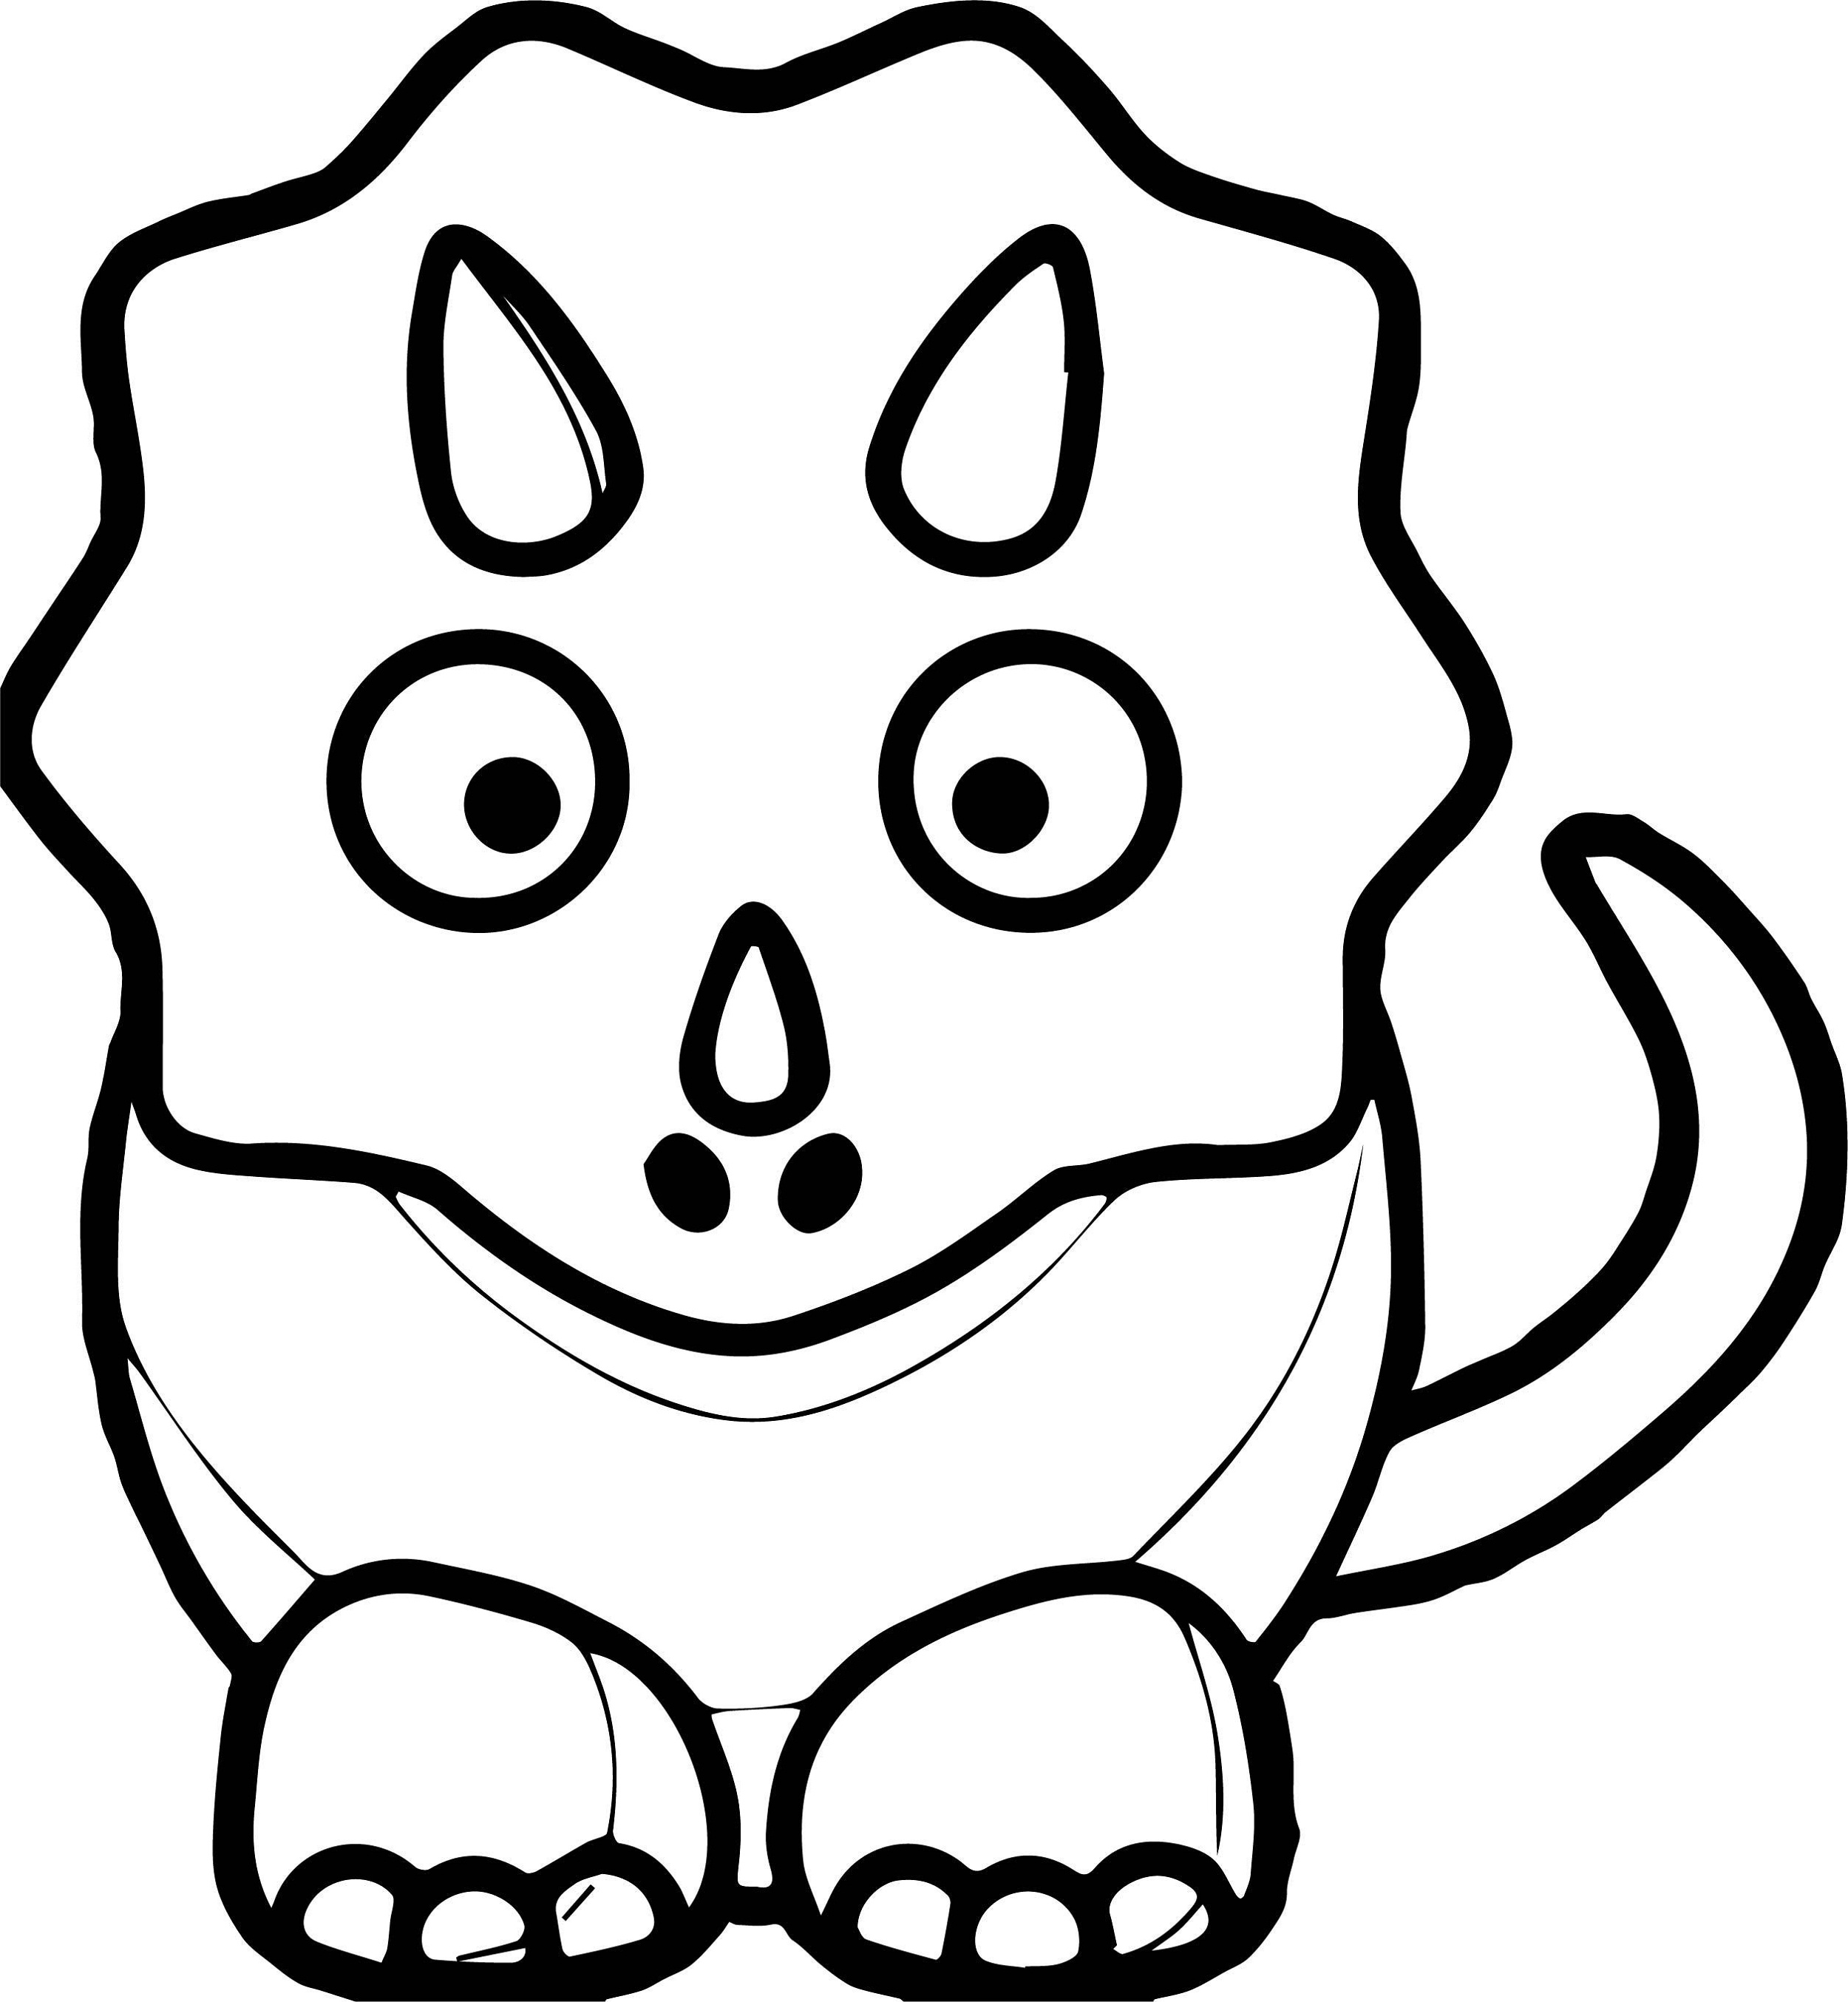 850 Unicorn Cute Dinosaur Coloring Pages for Kids